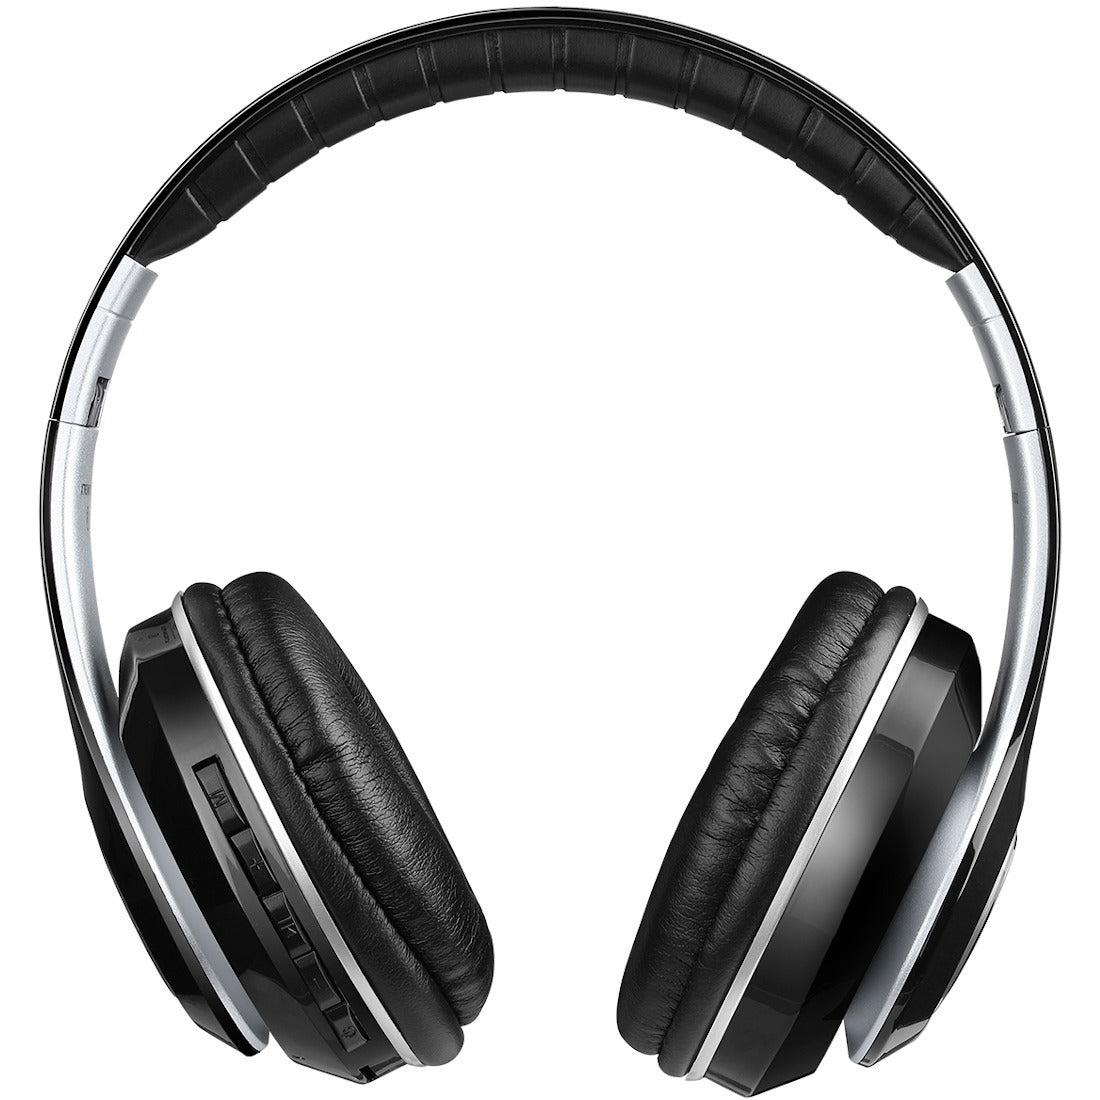 Adesso Xtream P500 - Bluetooth stereo headphone with built in microphone SpadezStore